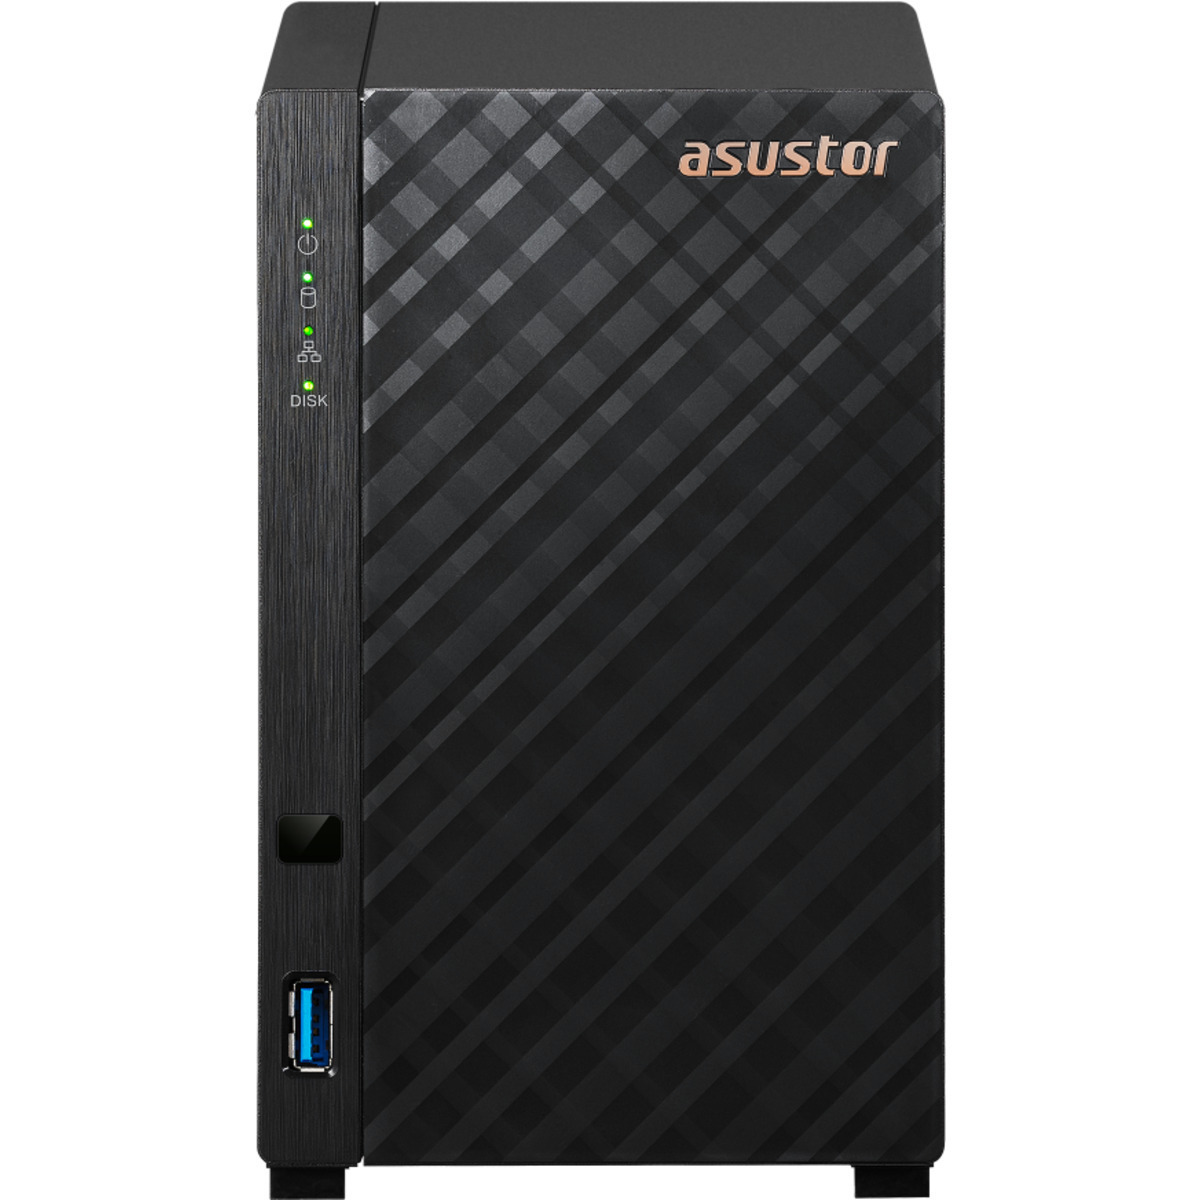 buy $1424 ASUSTOR DRIVESTOR 2 AS1102T 44tb Desktop NAS - Network Attached Storage Device 2x22000gb Western Digital Ultrastar DC HC570 WUH722222ALE6L4 3.5 7200rpm SATA 6Gb/s HDD ENTERPRISE Class Drives Installed - Burn-In Tested - nas headquarters buy network attached storage server device das new raid-5 free shipping usa DRIVESTOR 2 AS1102T